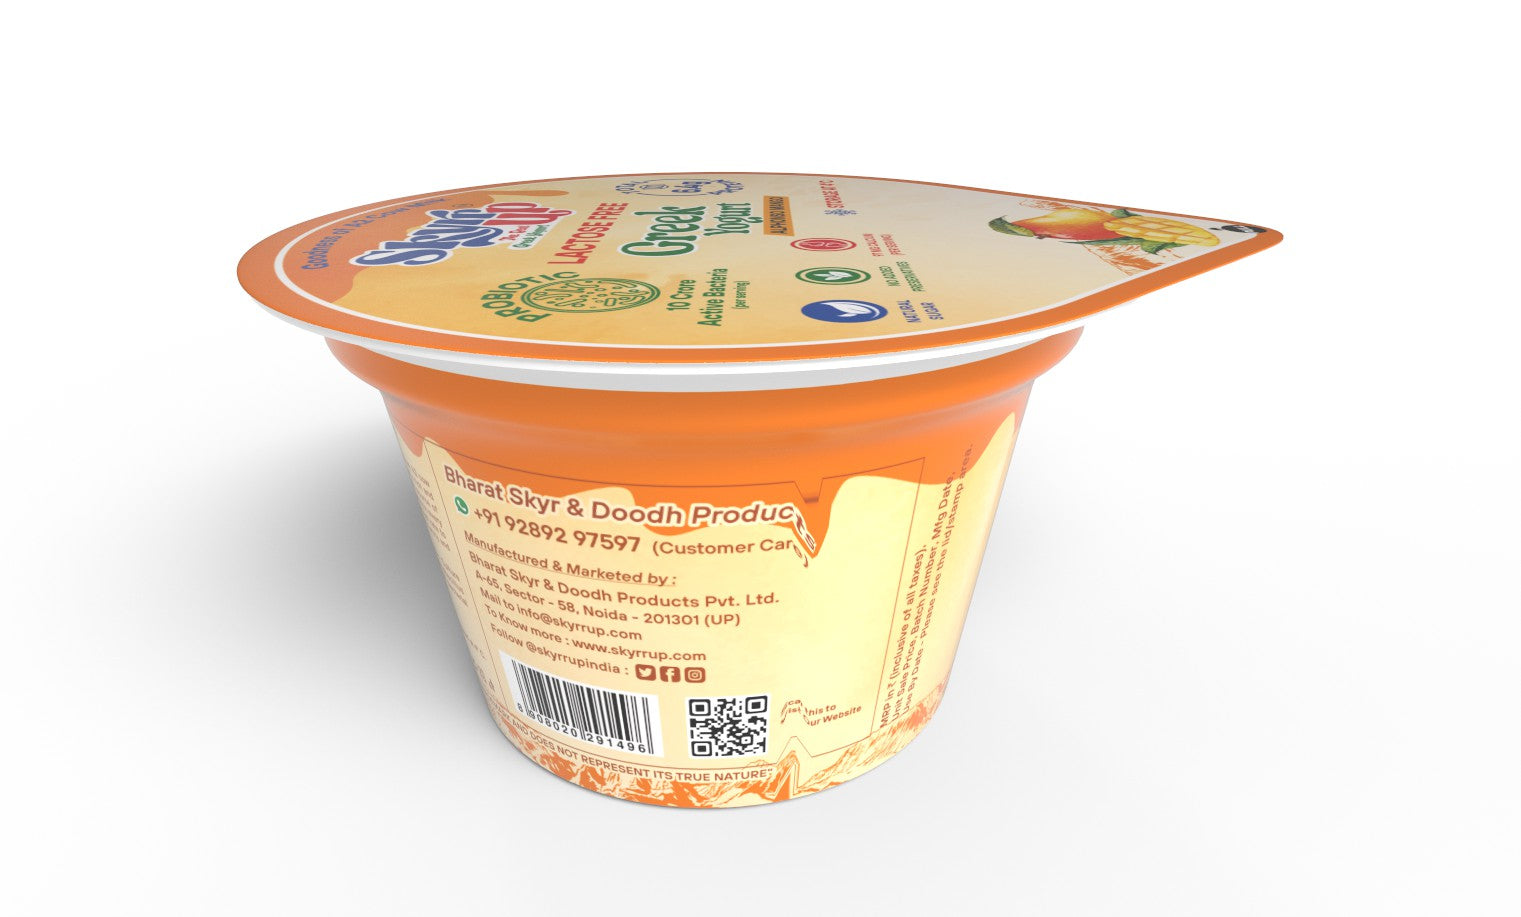 Greek Yogurt - 85gm - Mango (Made From A2 Cow Milk) - Probiotic, 6.4gm Protein, Zero Preservatives, Lactose Free- Pack of 6